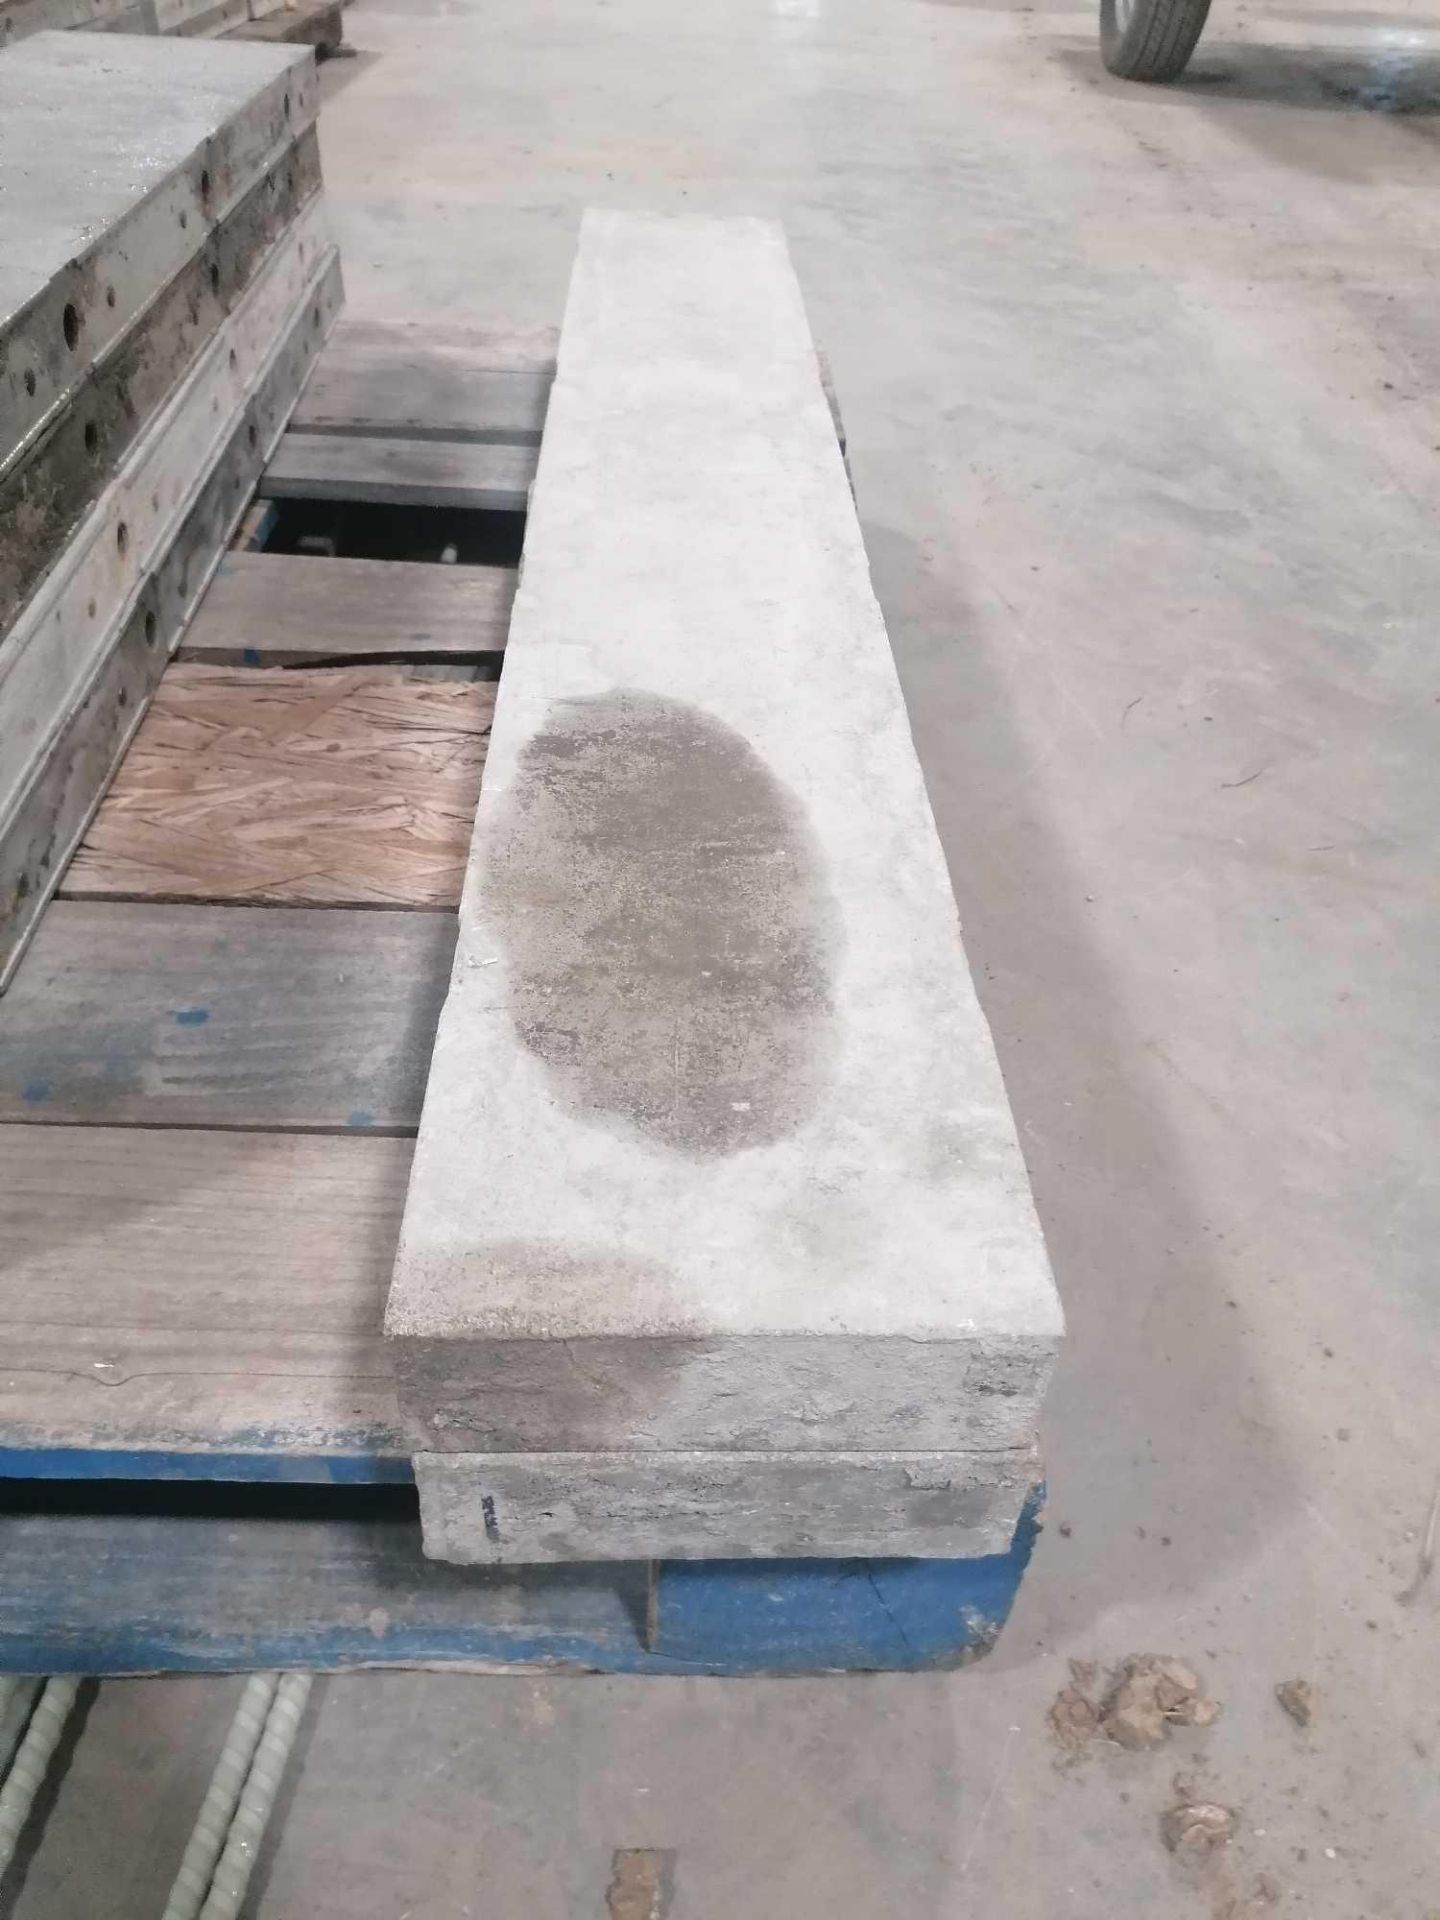 (2) 7" x 4' Western Aluminum Concrete Forms, Smooth 6-12 Hole Pattern. Located at 119 Spruce Street, - Image 2 of 2